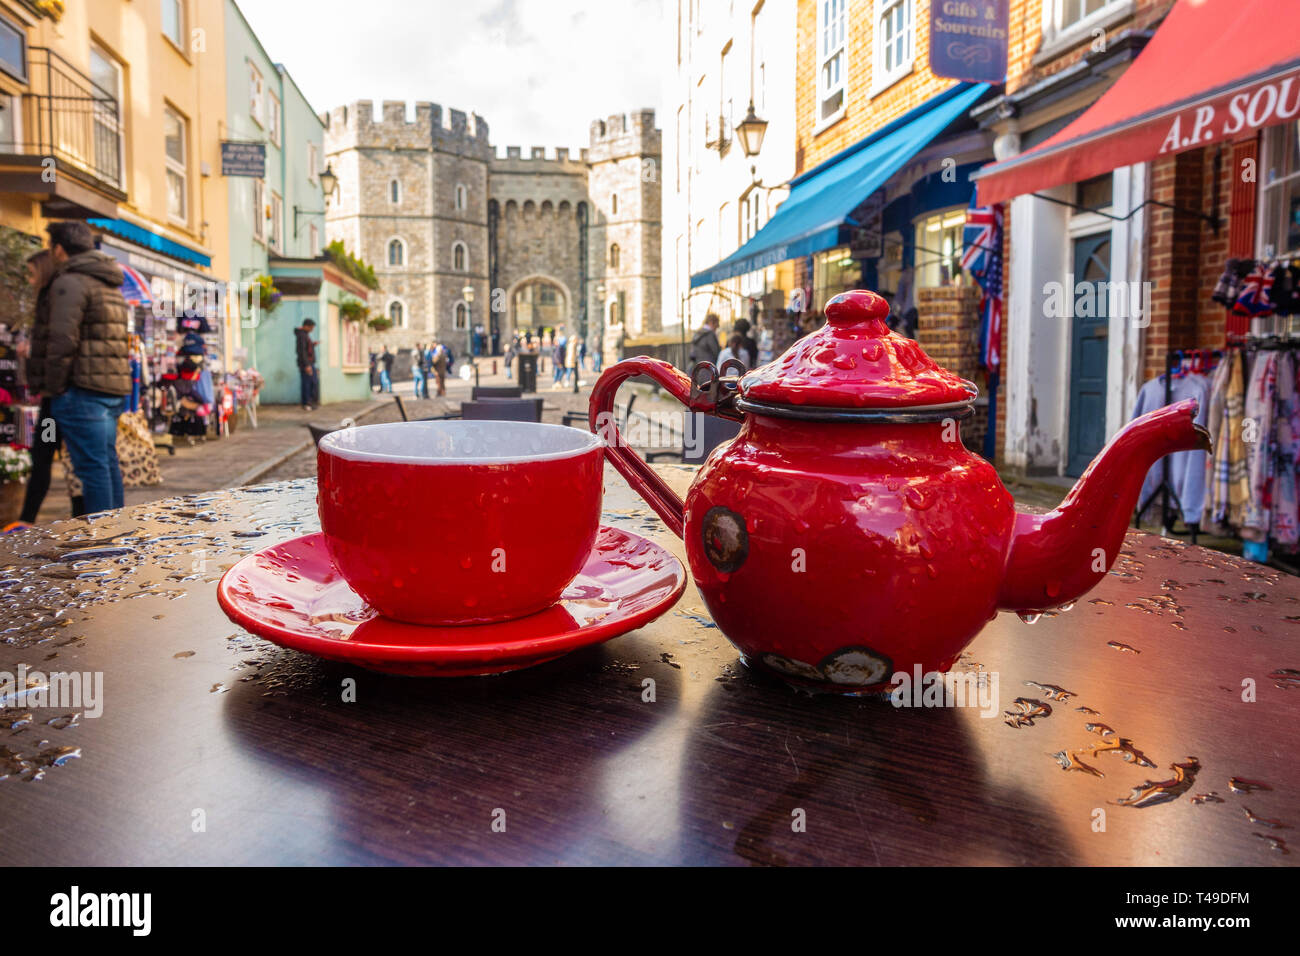 A bright red teacup, saucer and teapot form an eye catching centrepiece on an outdoor cafe table in Church Street, Windsor, UK Stock Photo